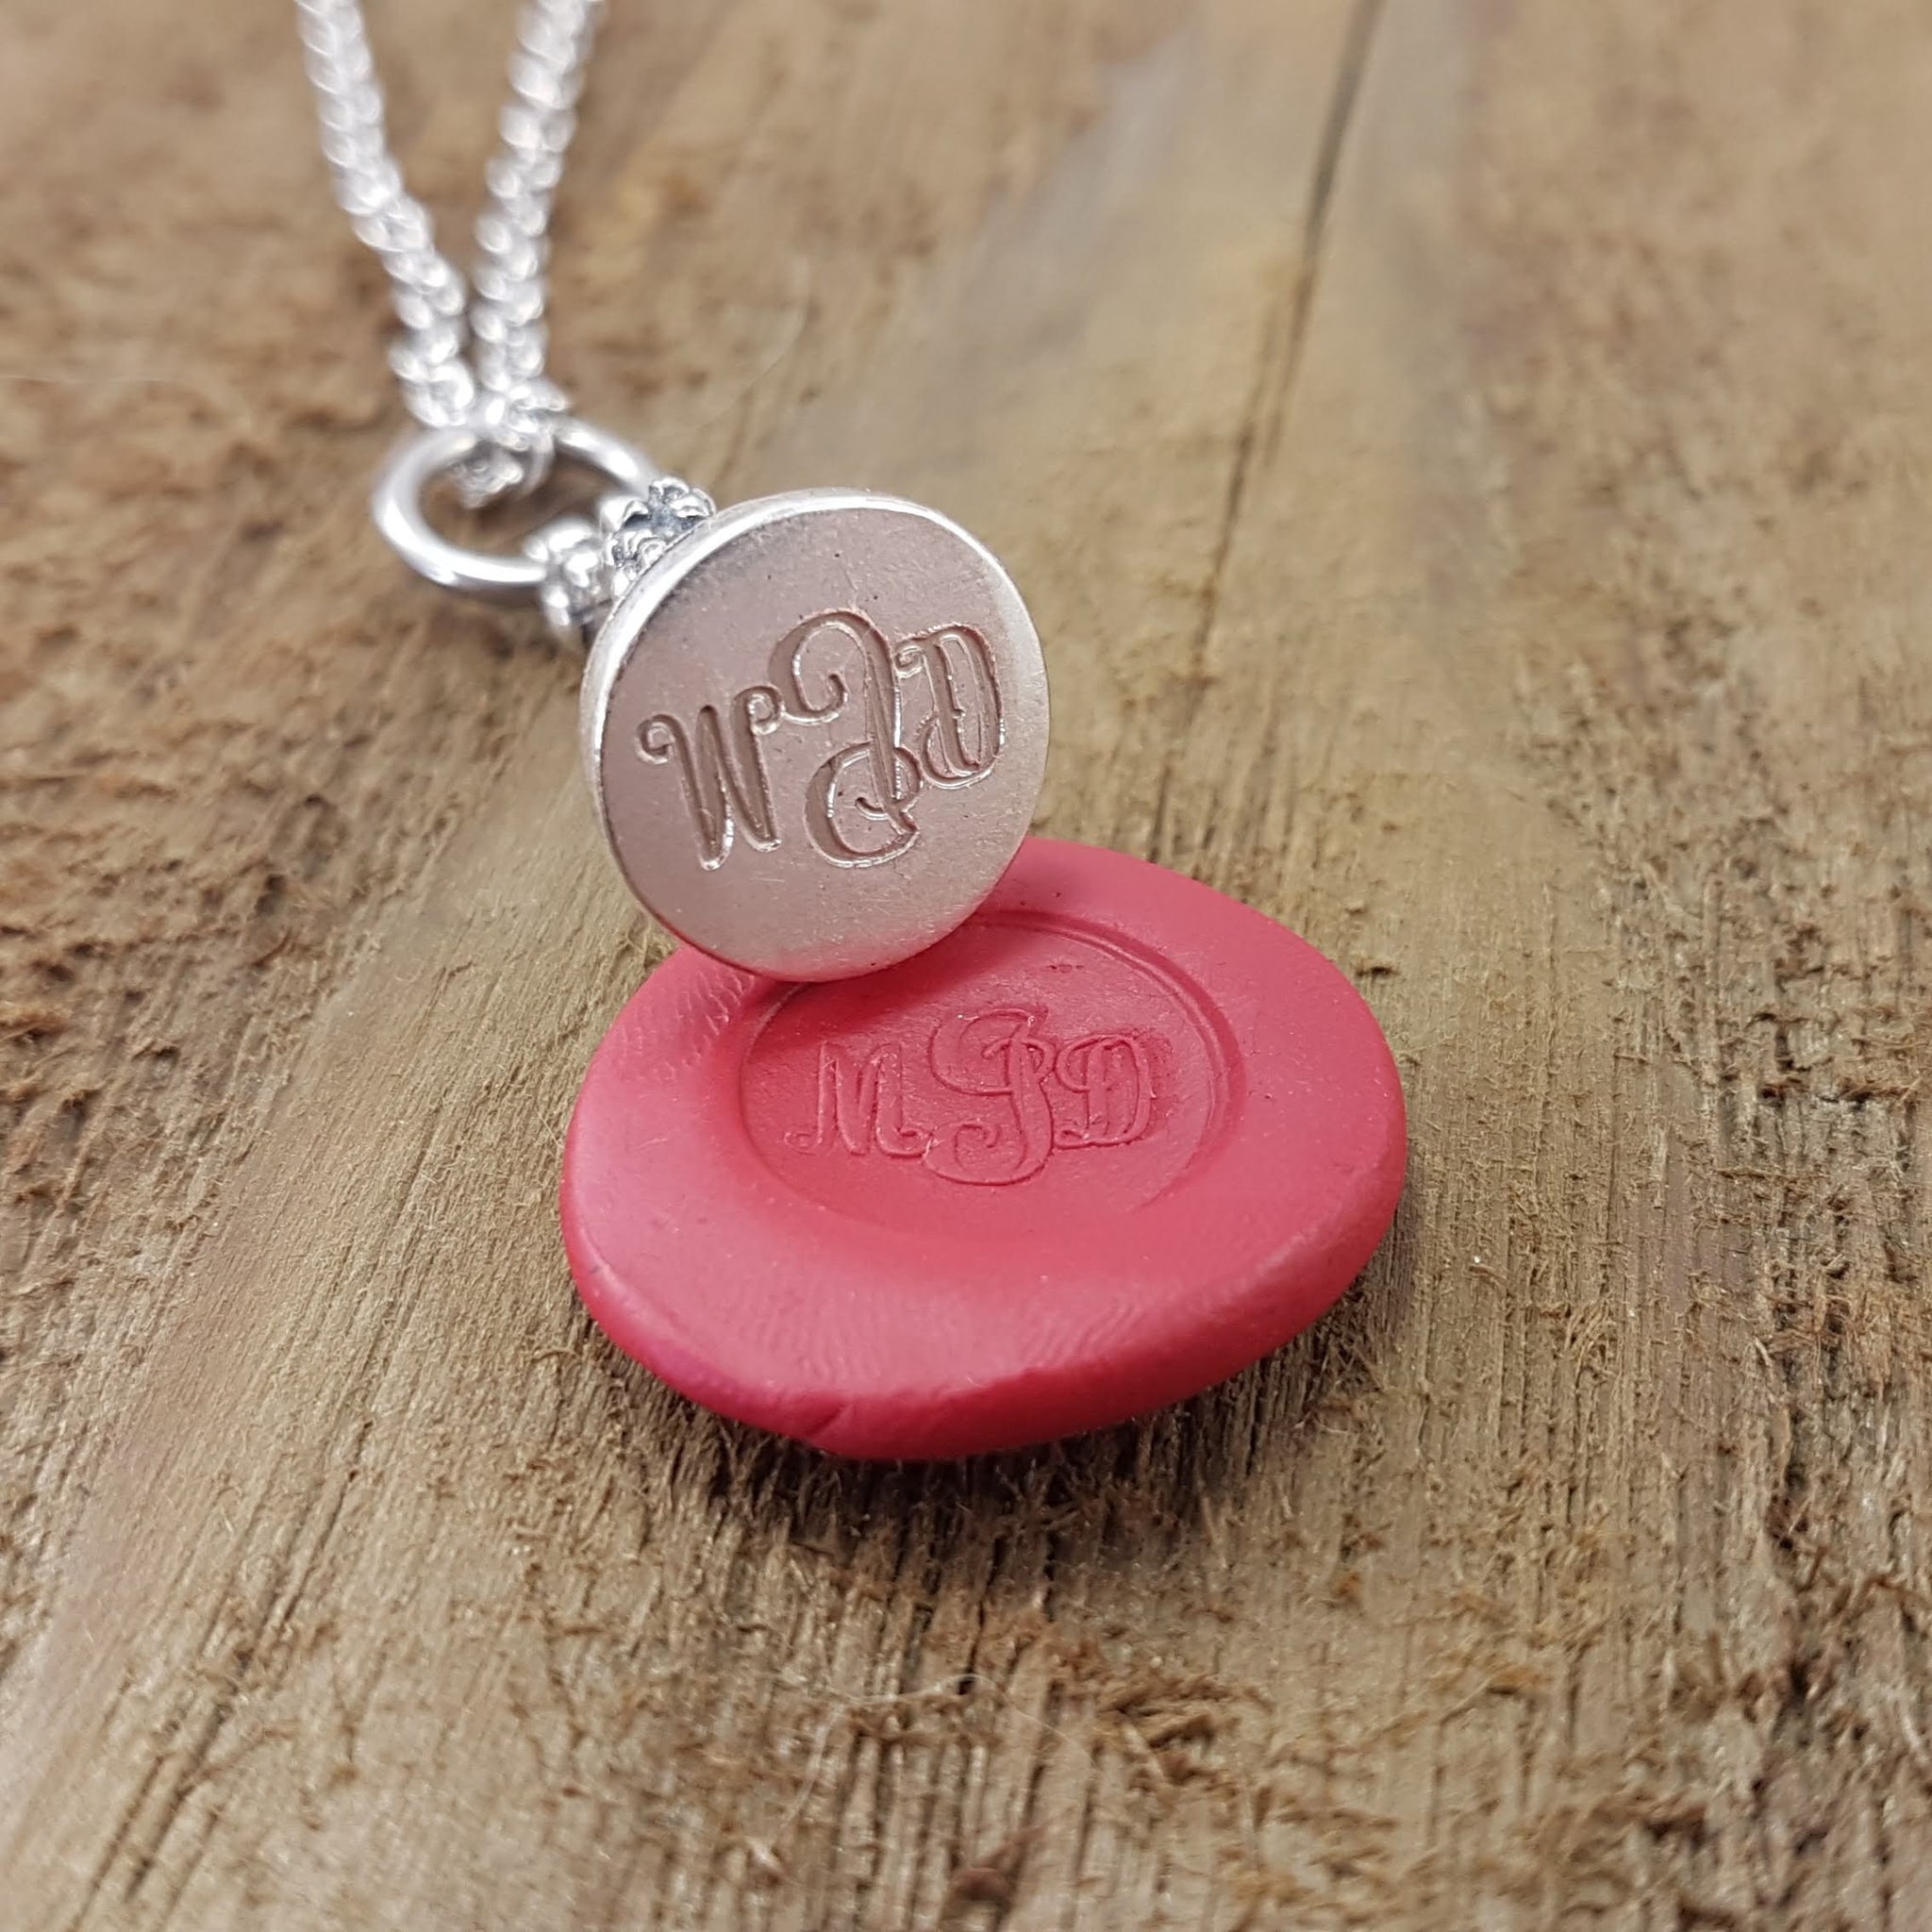 Personalized Wax Seal Necklace My Design Pendant Custom Design Jewelry Gold Engraved Jewelry My Name Wax Seal Stamp Gift for Wedding - Gwen Delicious Jewelry Designs